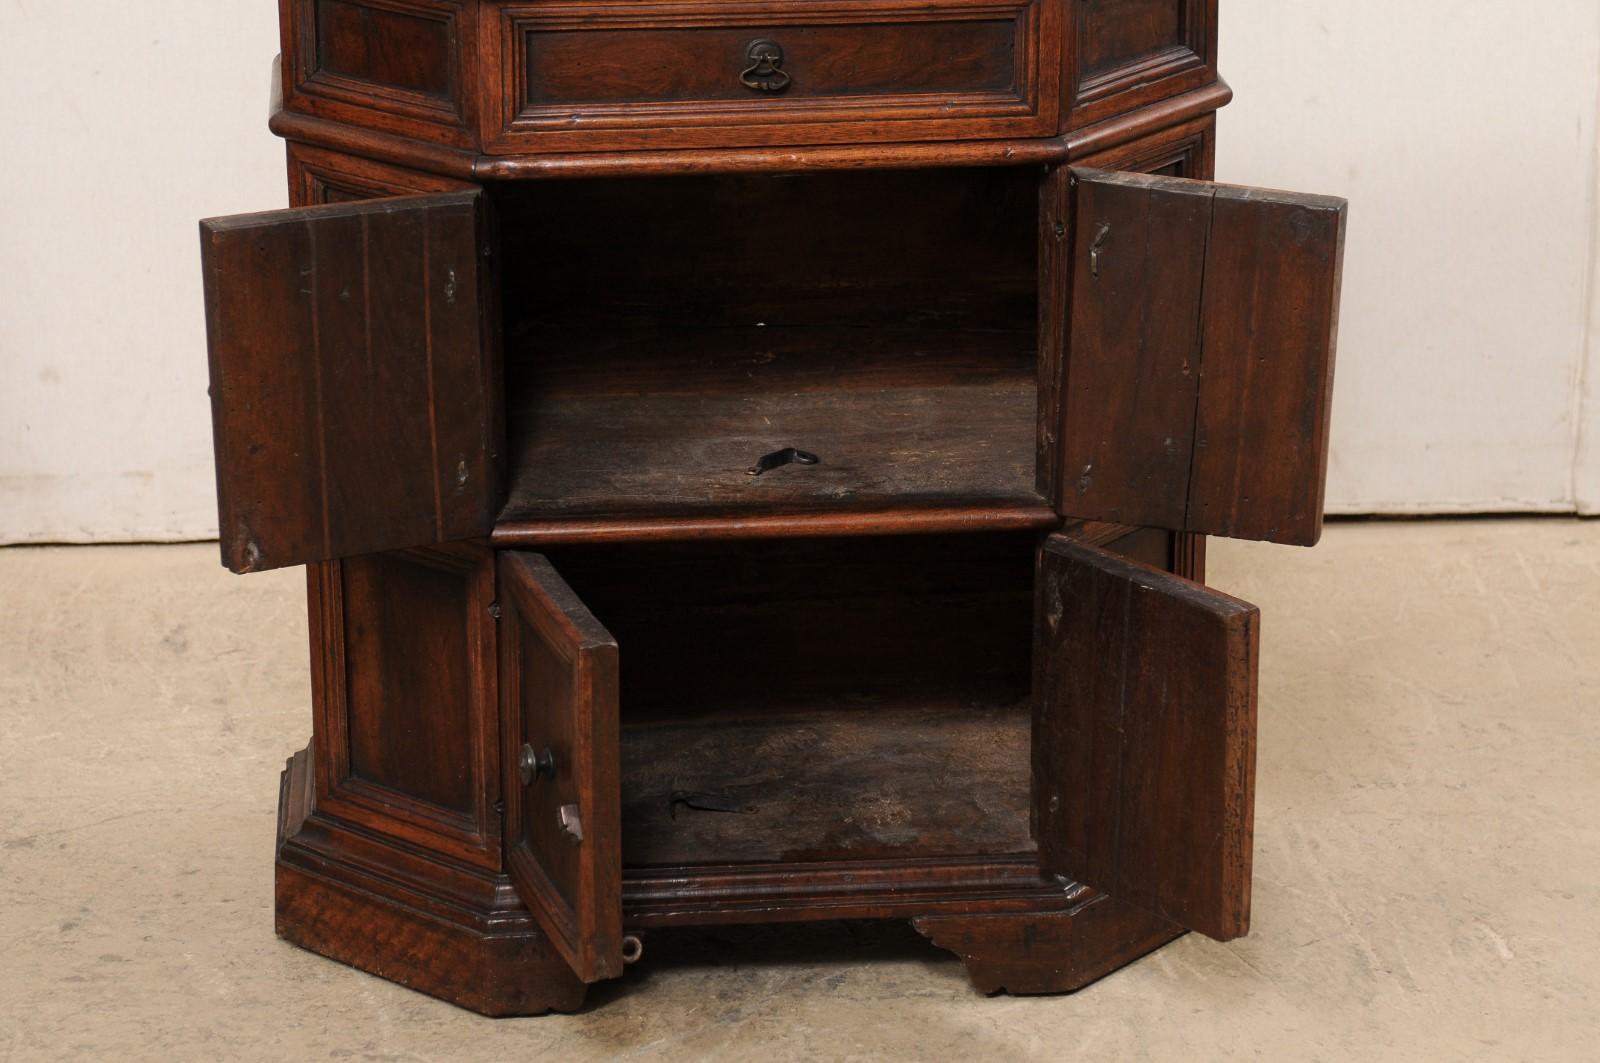 Italian Petite-Sized Paneled & Carved Console Cabinets, Early 19th Century 2